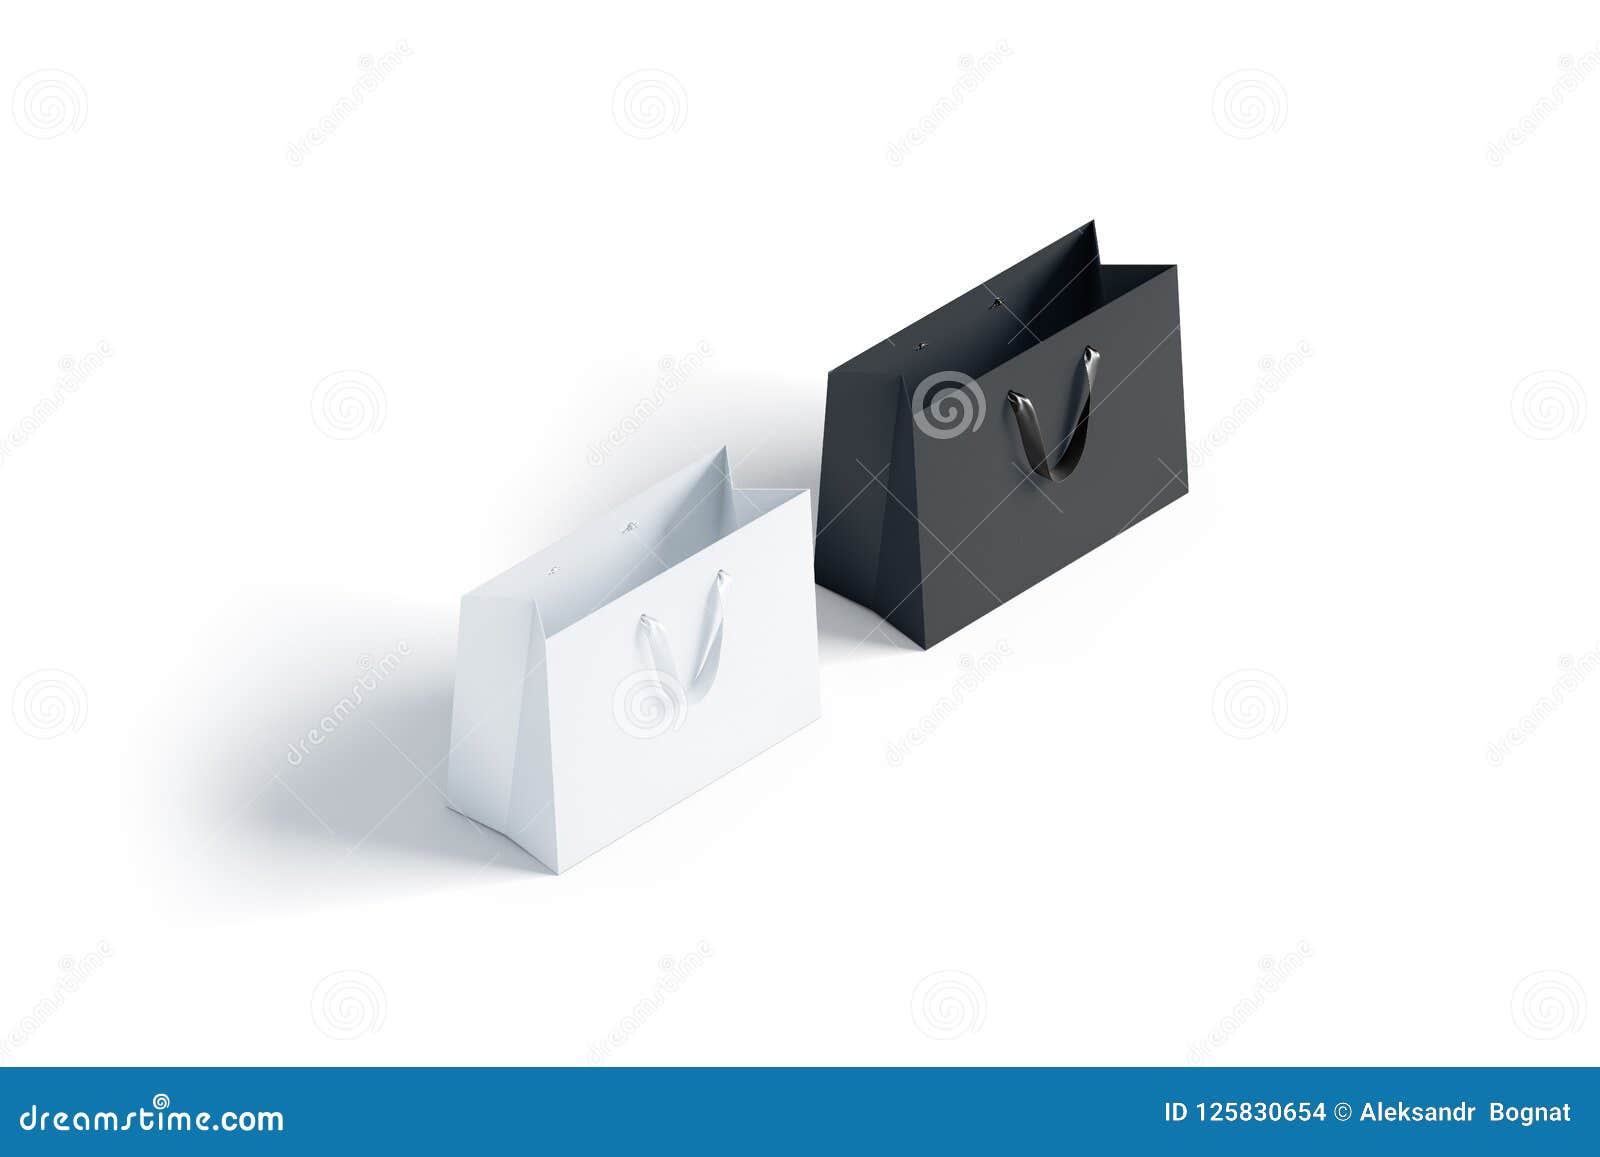 Download Blank Black And White Paper Bag With Silk Handle Mockup ...